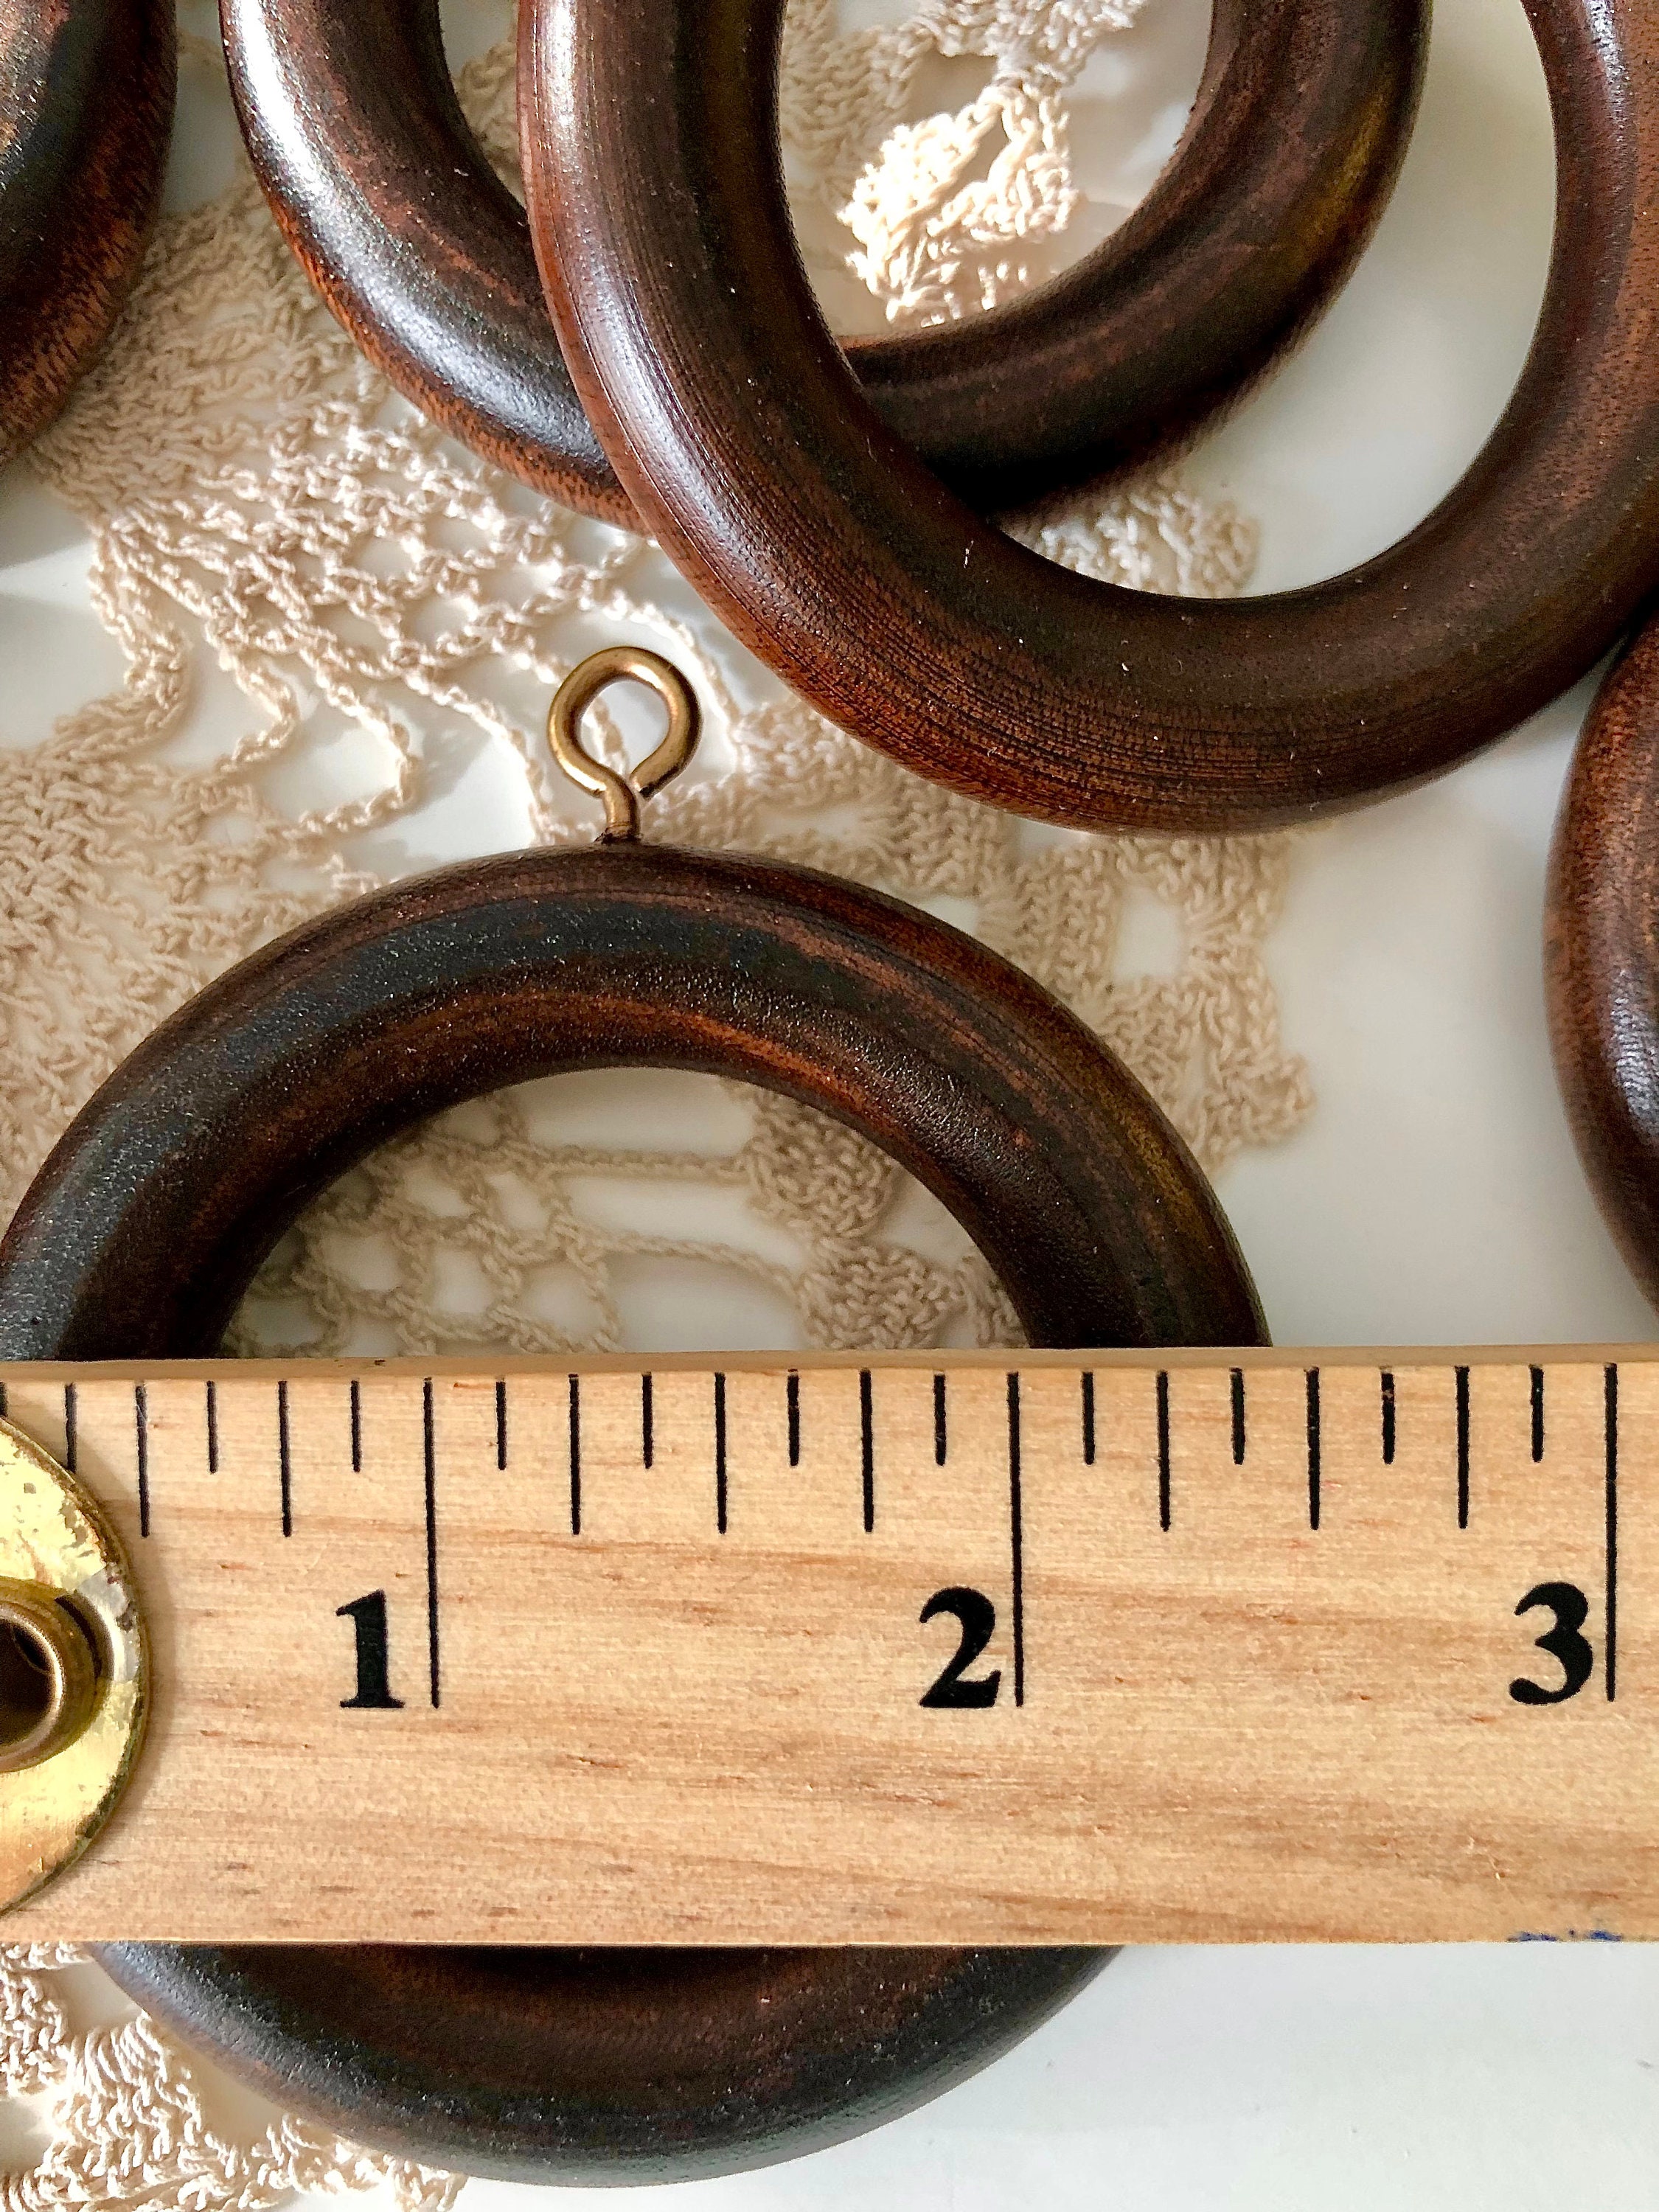 Wooden A colllection Victorian wooden curtain rings,gesso and brow 16 pcs.